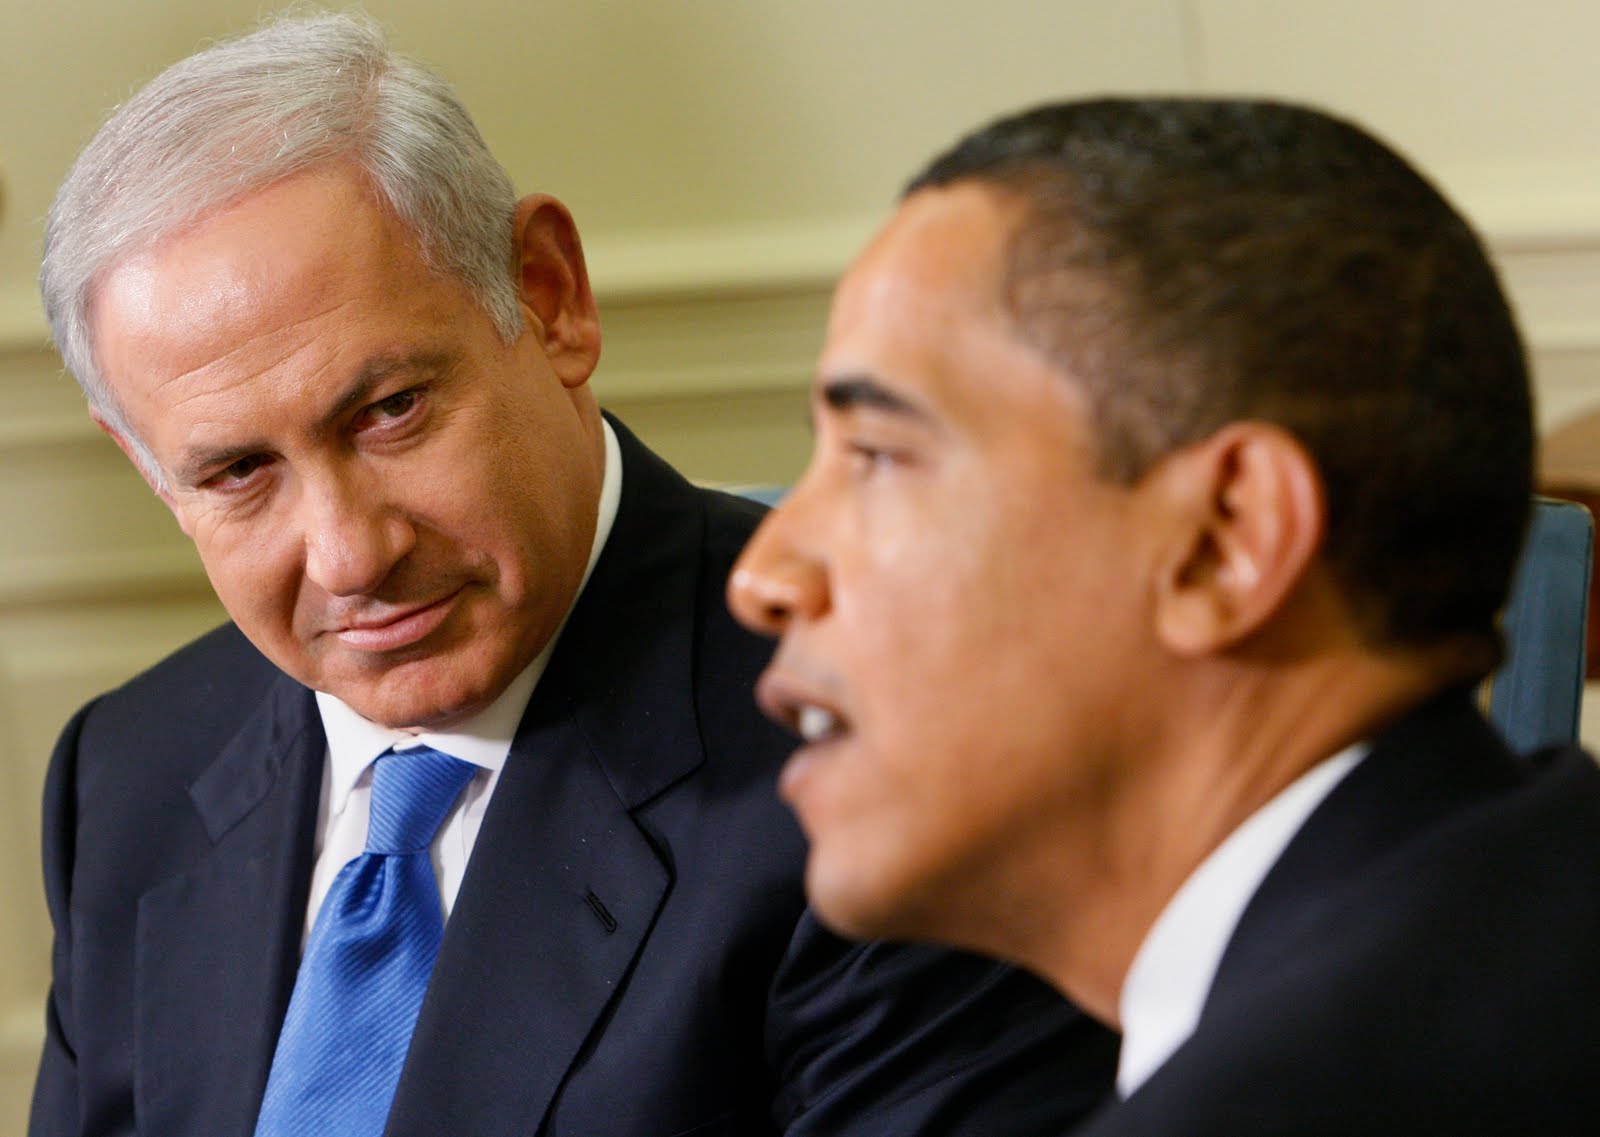 Israeli Prime Minister Benjamin Netanyahu looks towards President Barack Obama as he speaks to reporters in the Oval Office of the White House in Washington, Monday, May 18, 2009. (AP Photo/Charles Dharapak)